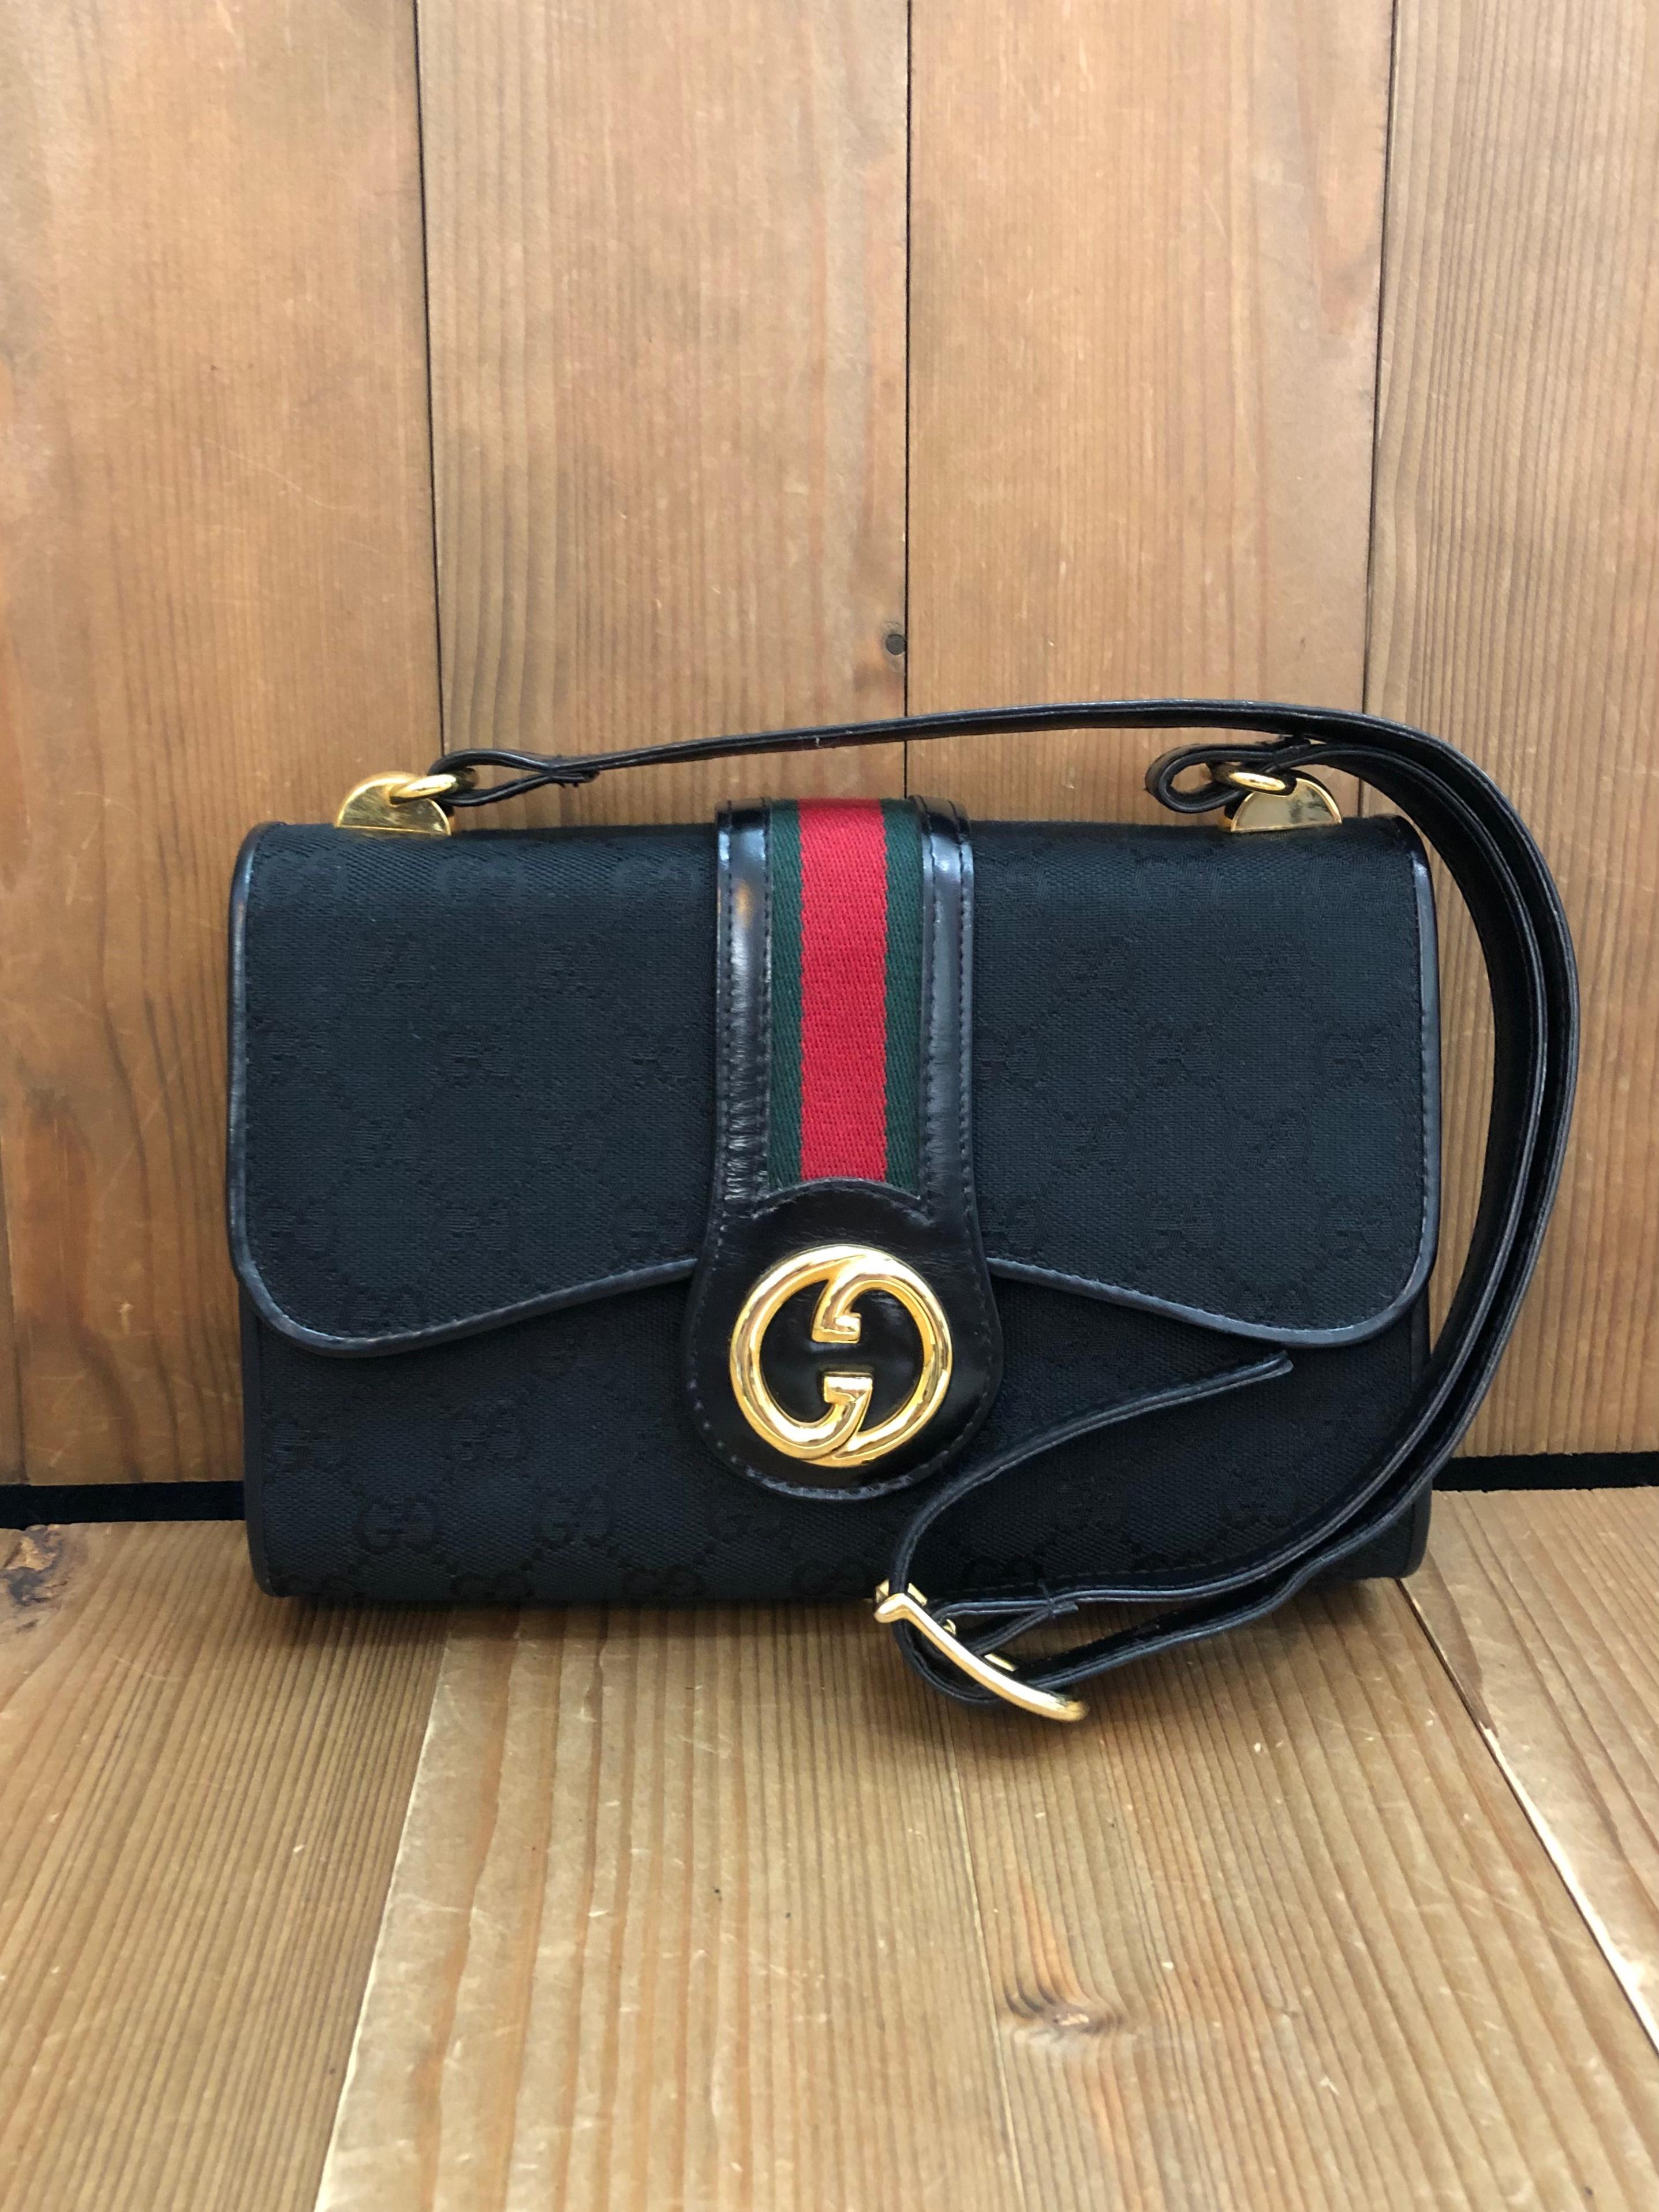 This Vintage GUCCI Web shoulder bag is crafted of GG monogram jacquard in black and black smooth leather featuring Gucci’s iconic red/green stripe along the top to the front. Front flap snap closure opens to a black leather interior featuring a